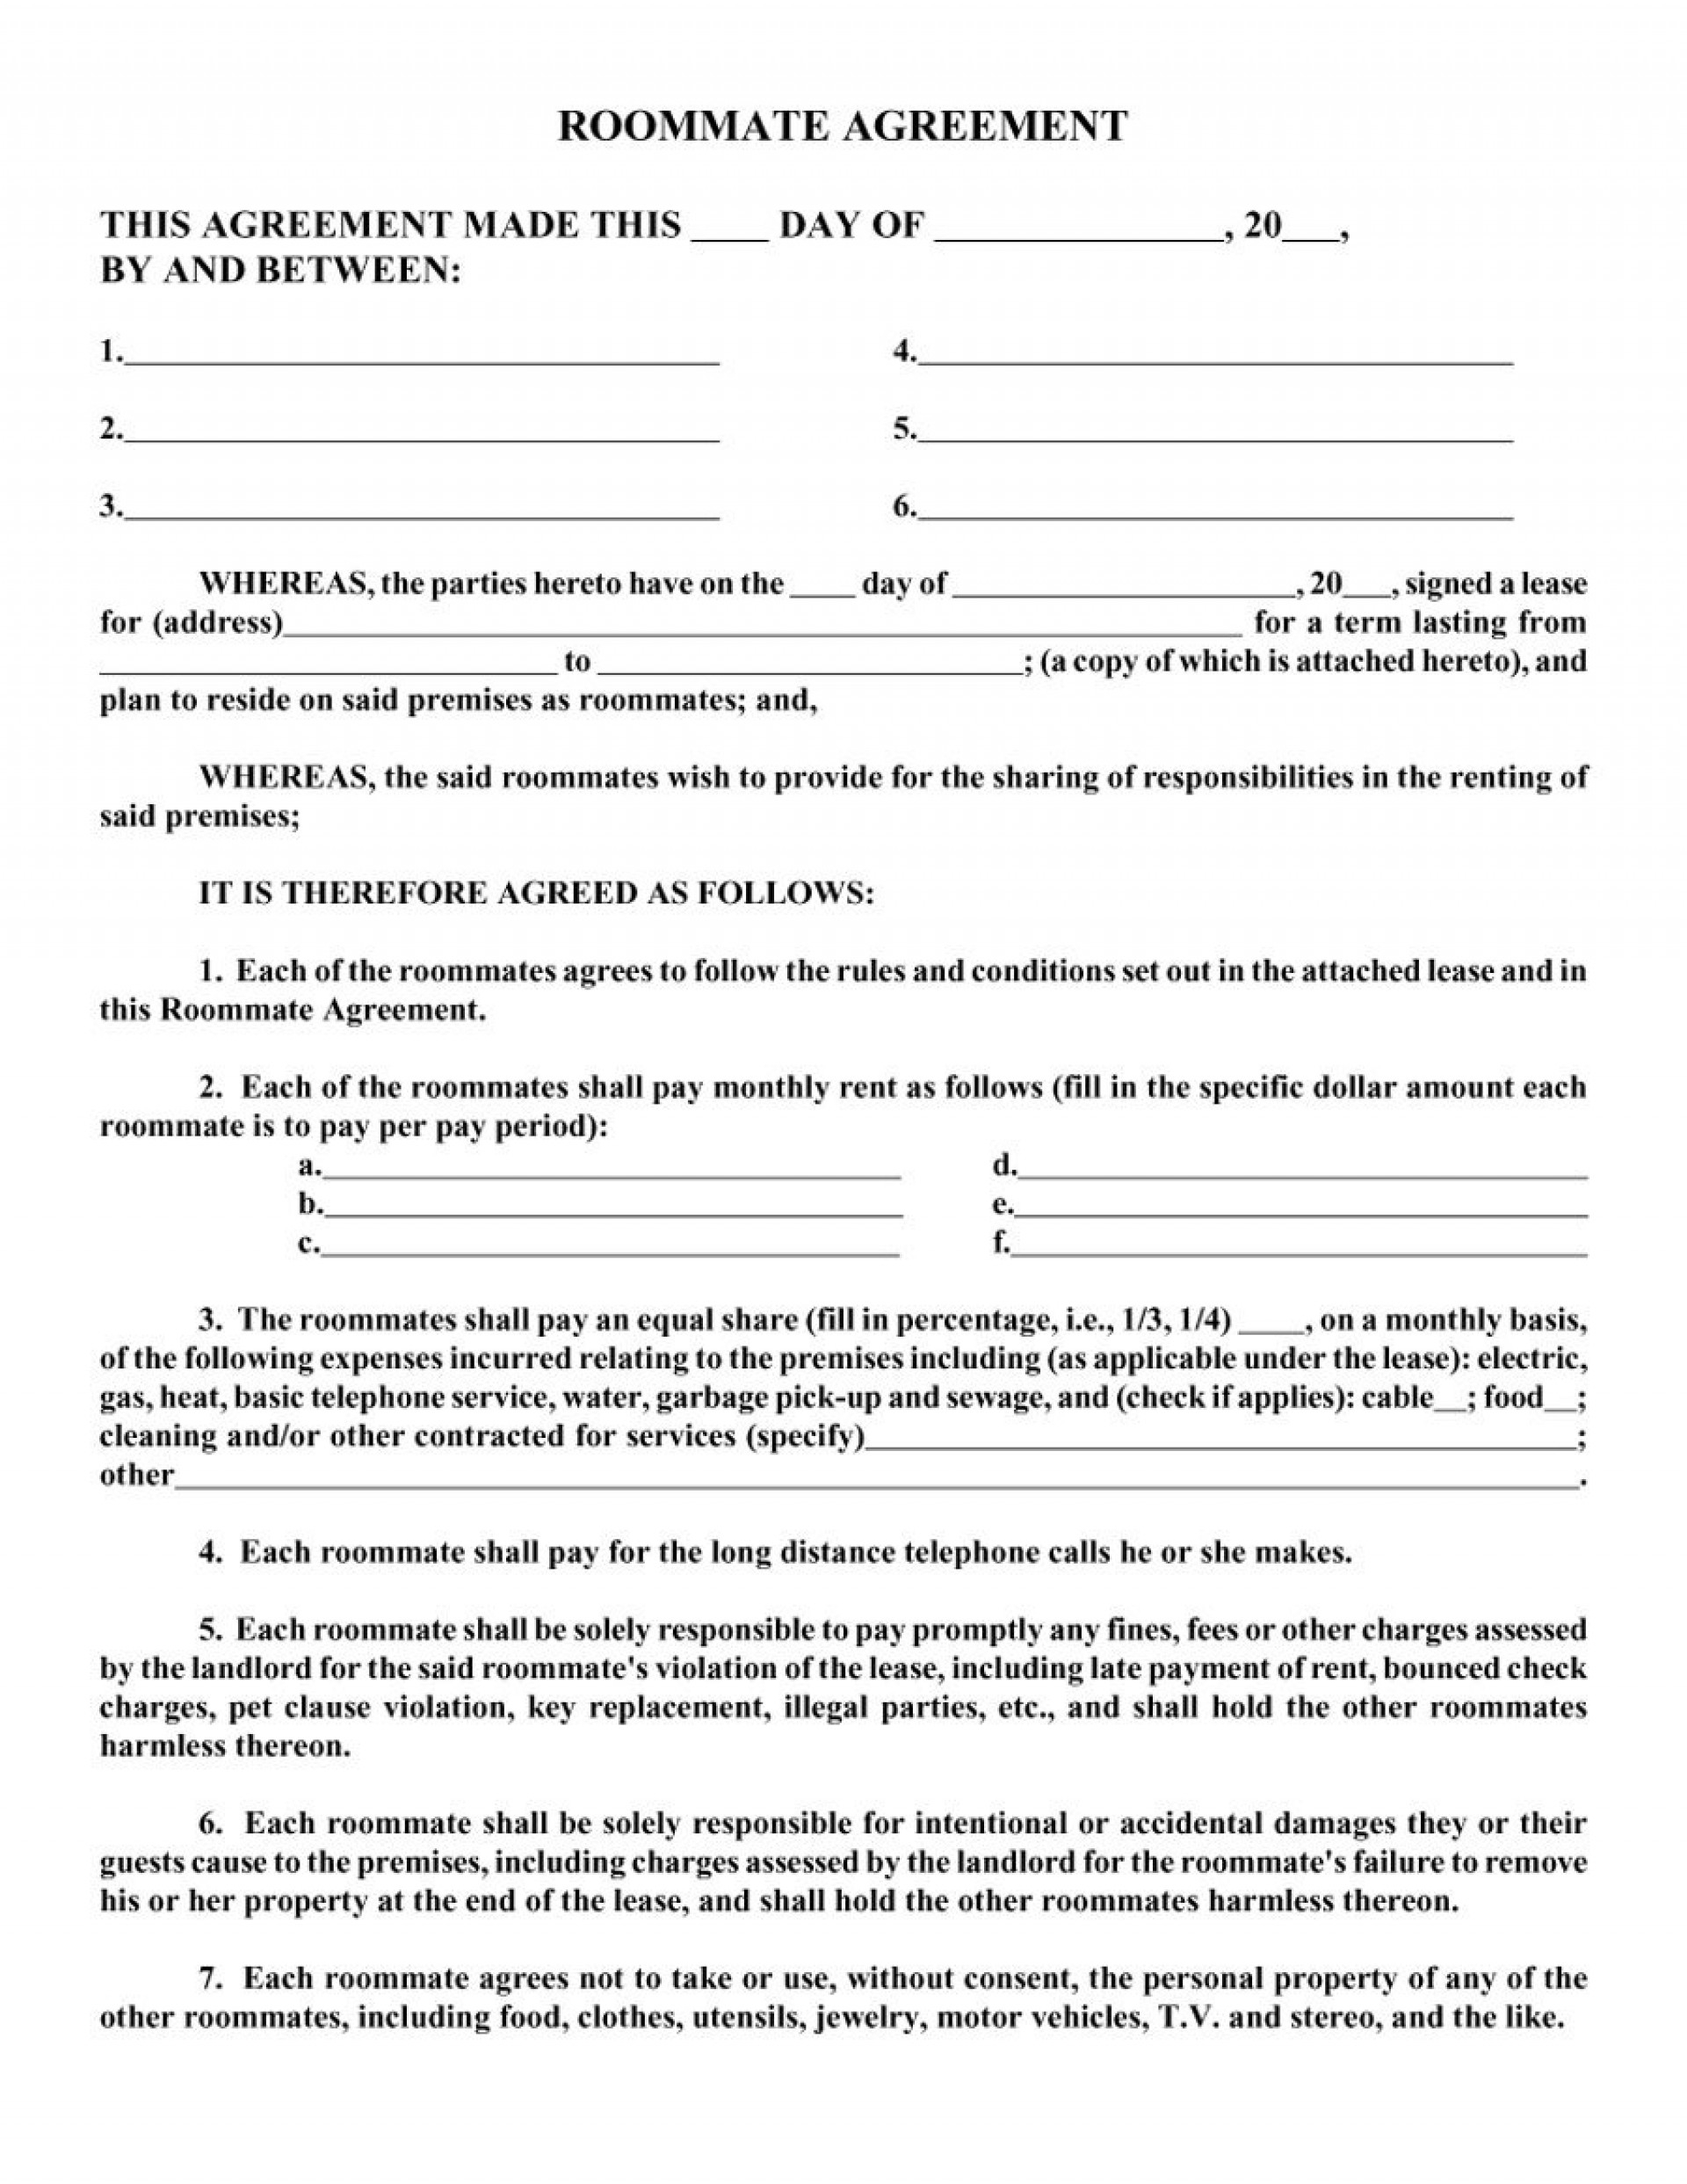 Roommate Agreement Template Word 004 Roommate Agreement Template Ideas Top Rental Forms Word Free